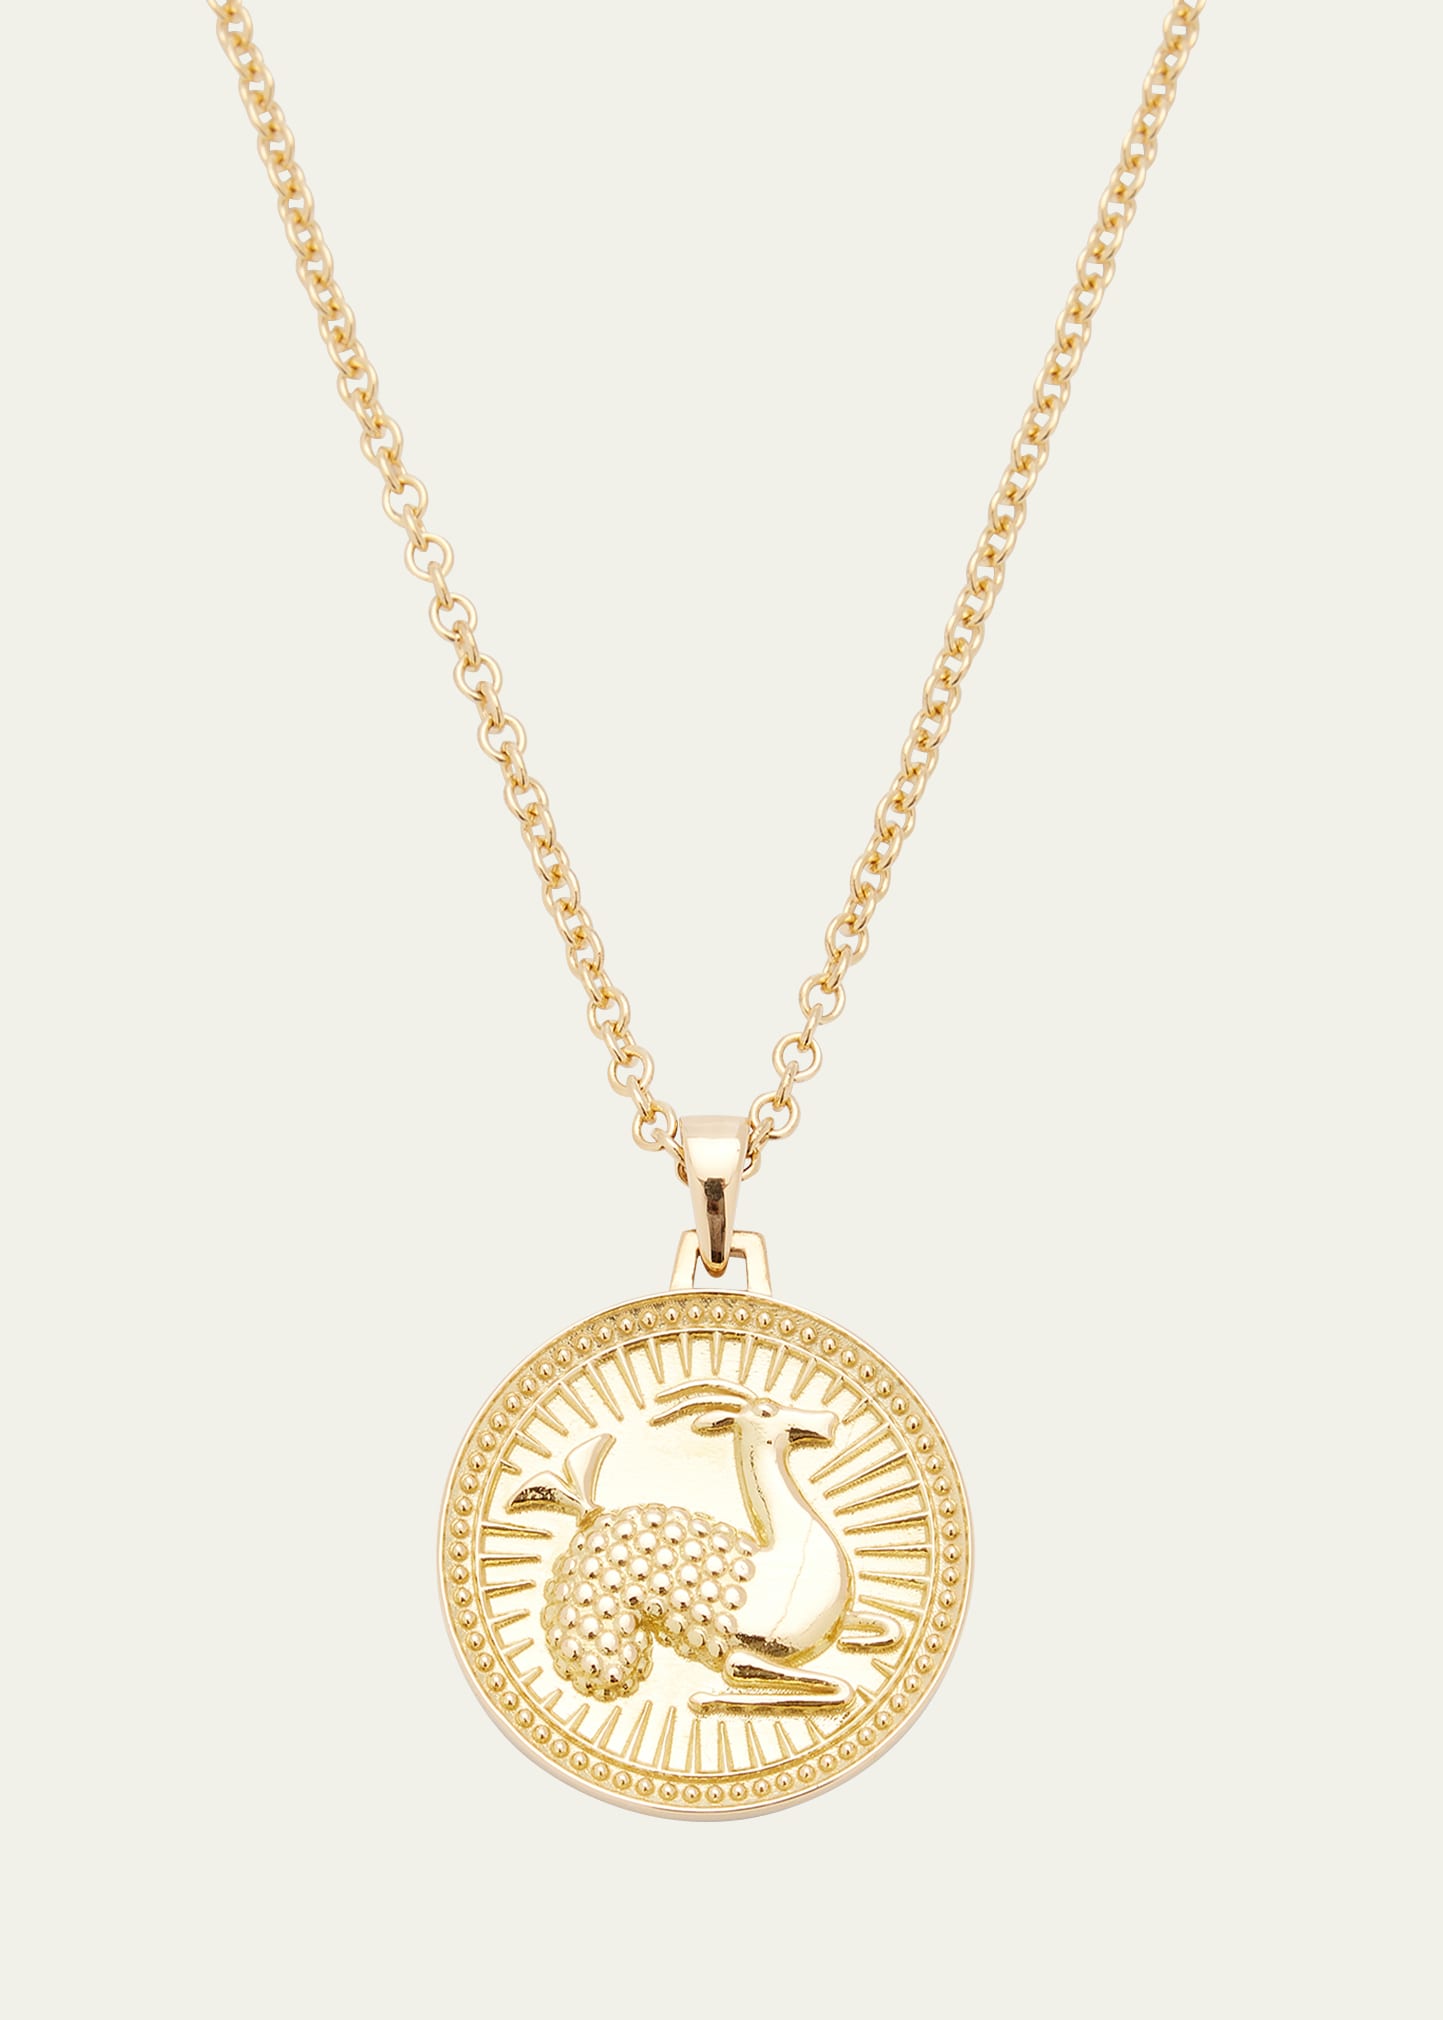 Futura Jewelry Fairmined Gold Aries Necklace